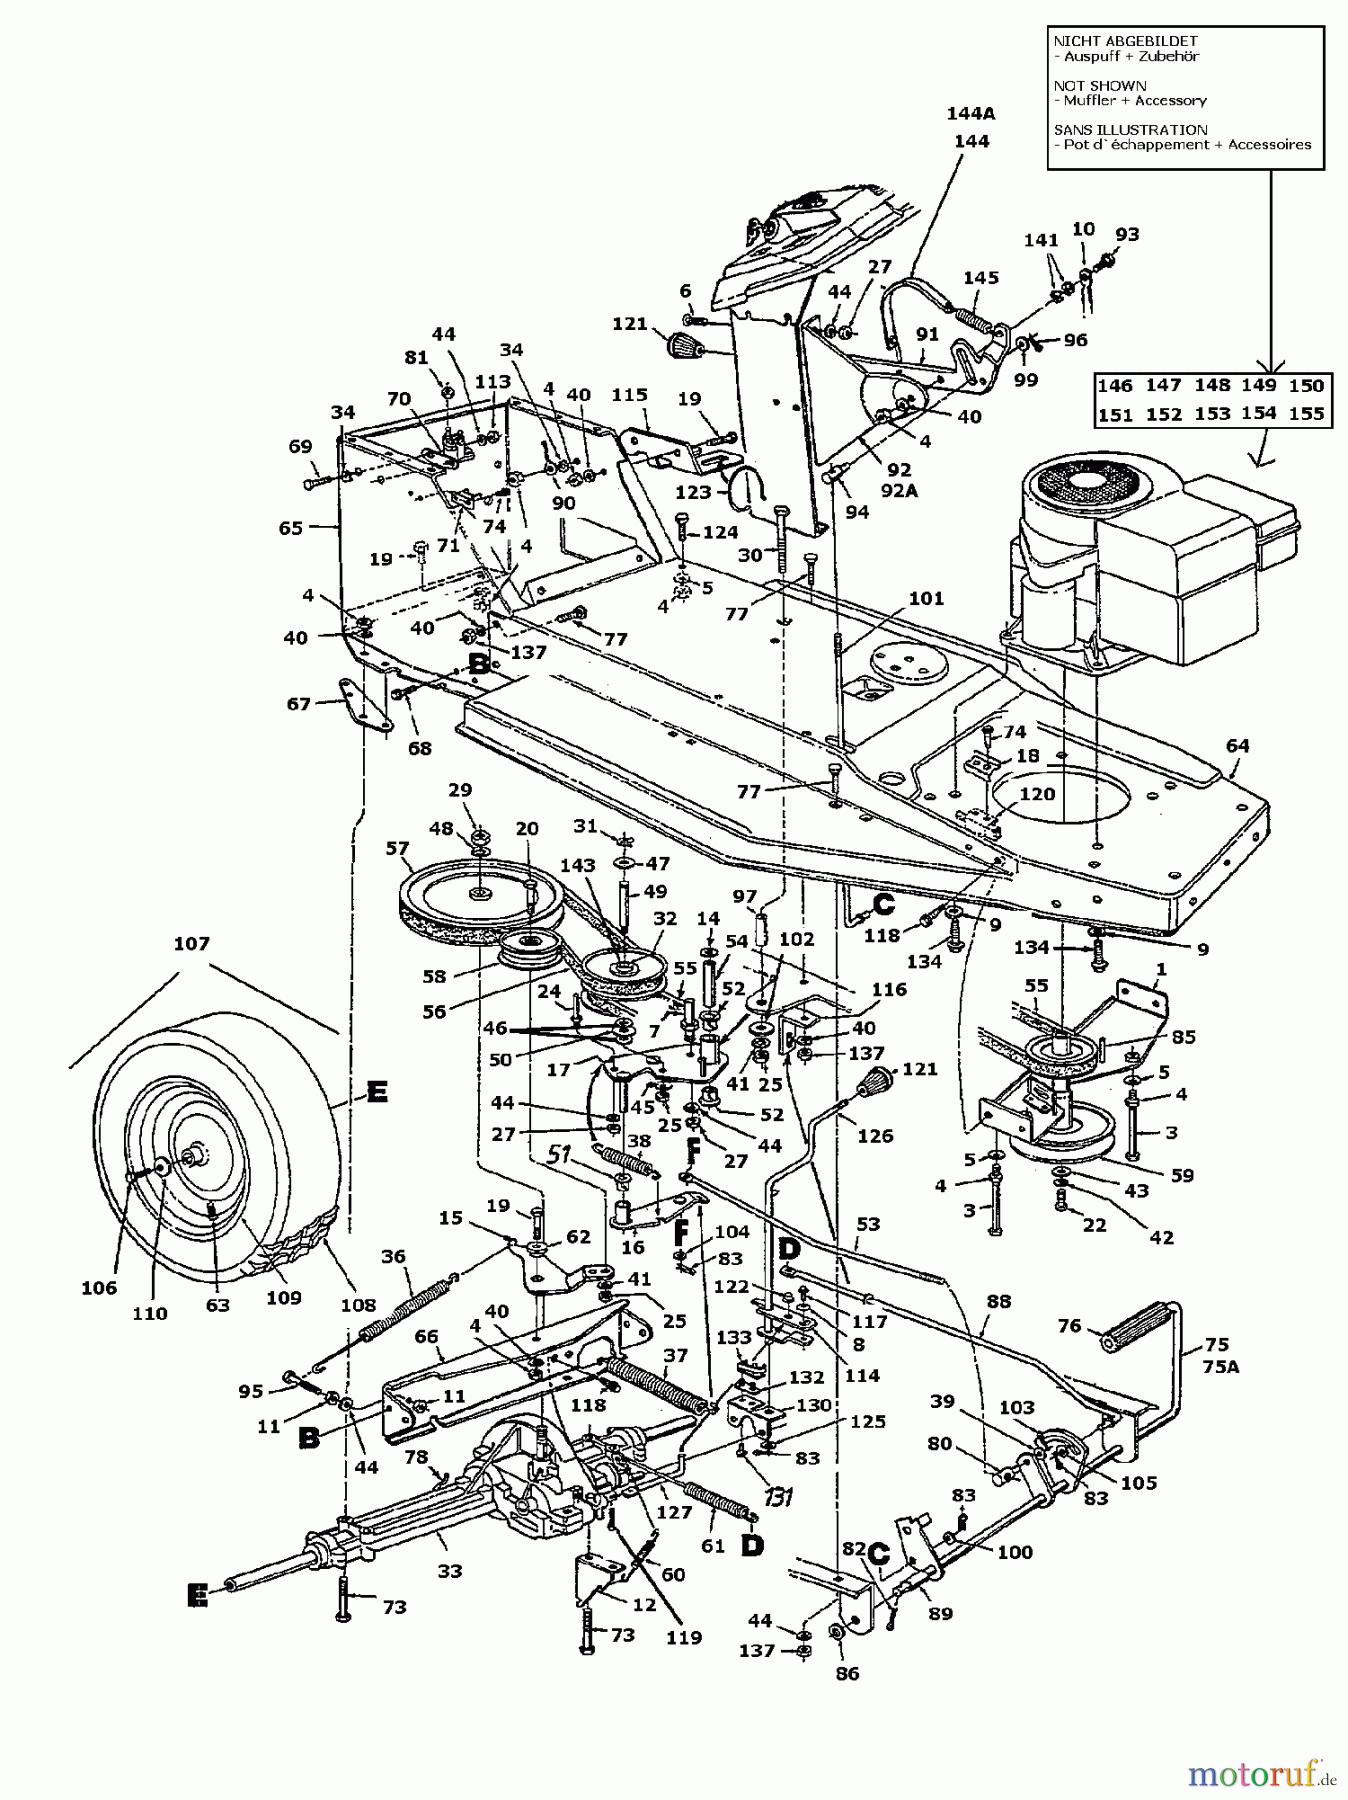  Columbia Lawn tractors 112/910 N 134I451E626  (1994) Drive system, Engine pulley, Pedal, Rear wheels